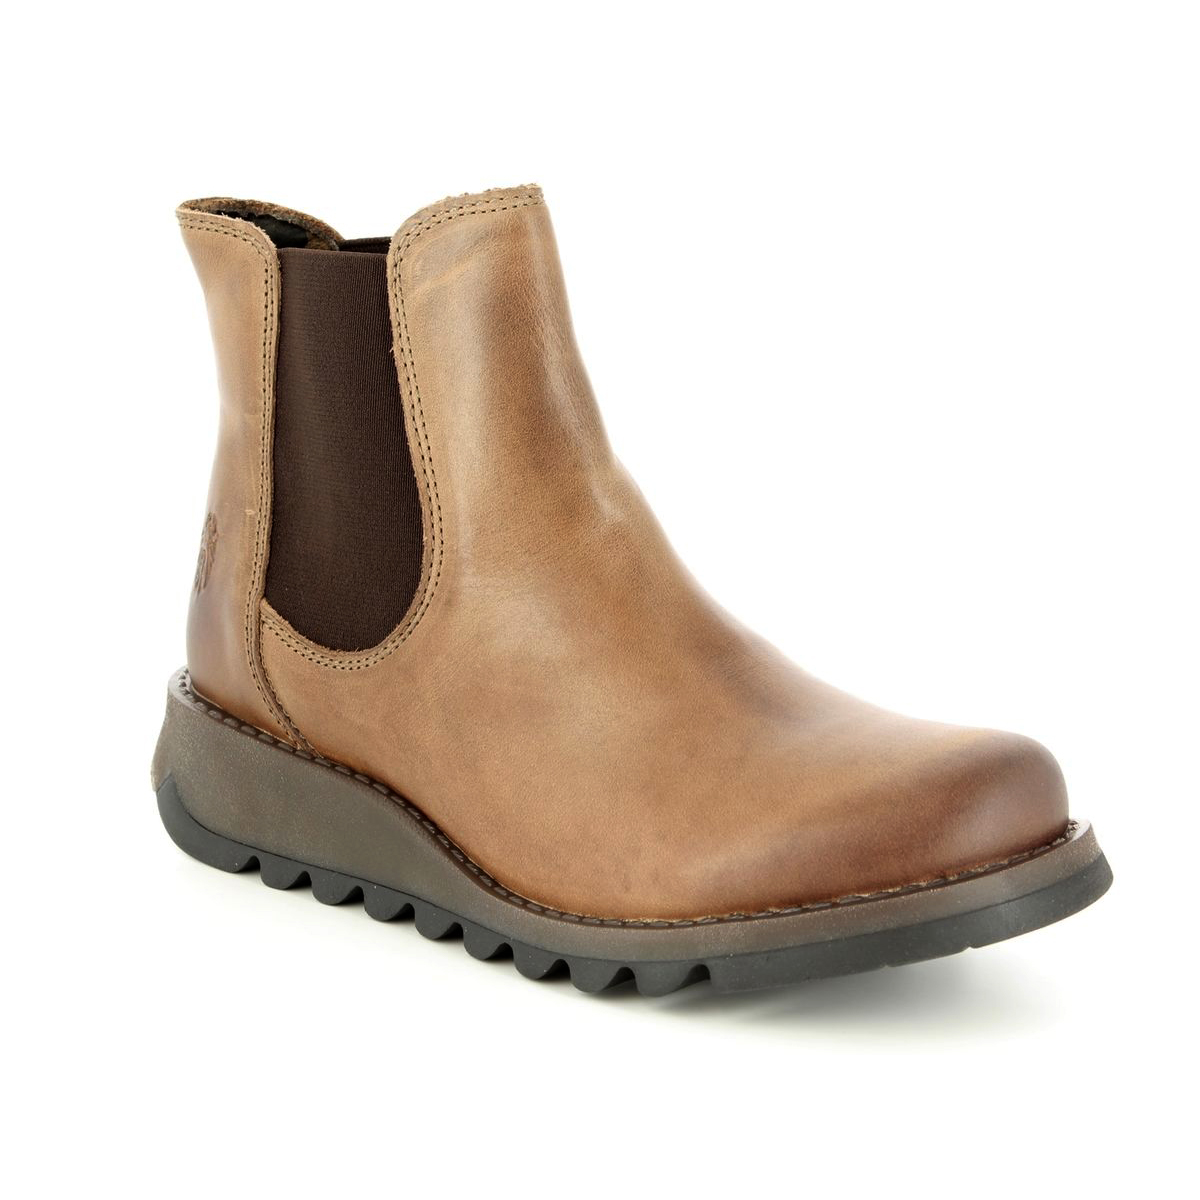 Fly London Salv Camel Womens Chelsea Boots P143195-002 in a Plain Leather in Size 40